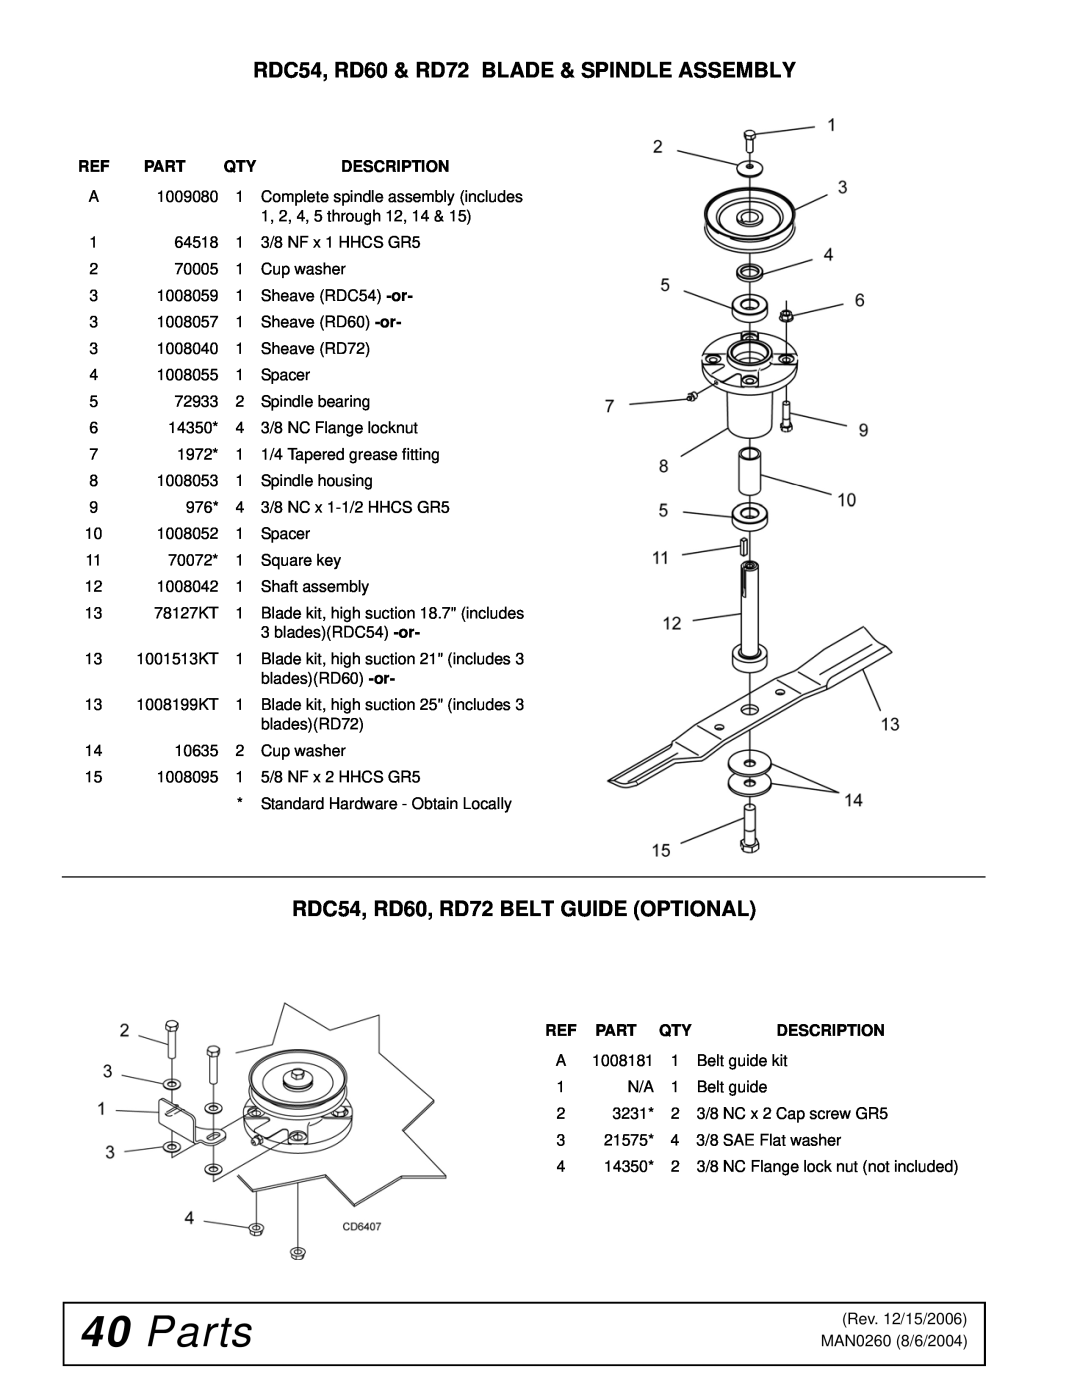 Woods Equipment manual 40Parts, RDC54, RD60 & RD72 BLADE & SPINDLE ASSEMBLY, RDC54, RD60, RD72 BELT GUIDE OPTIONAL 